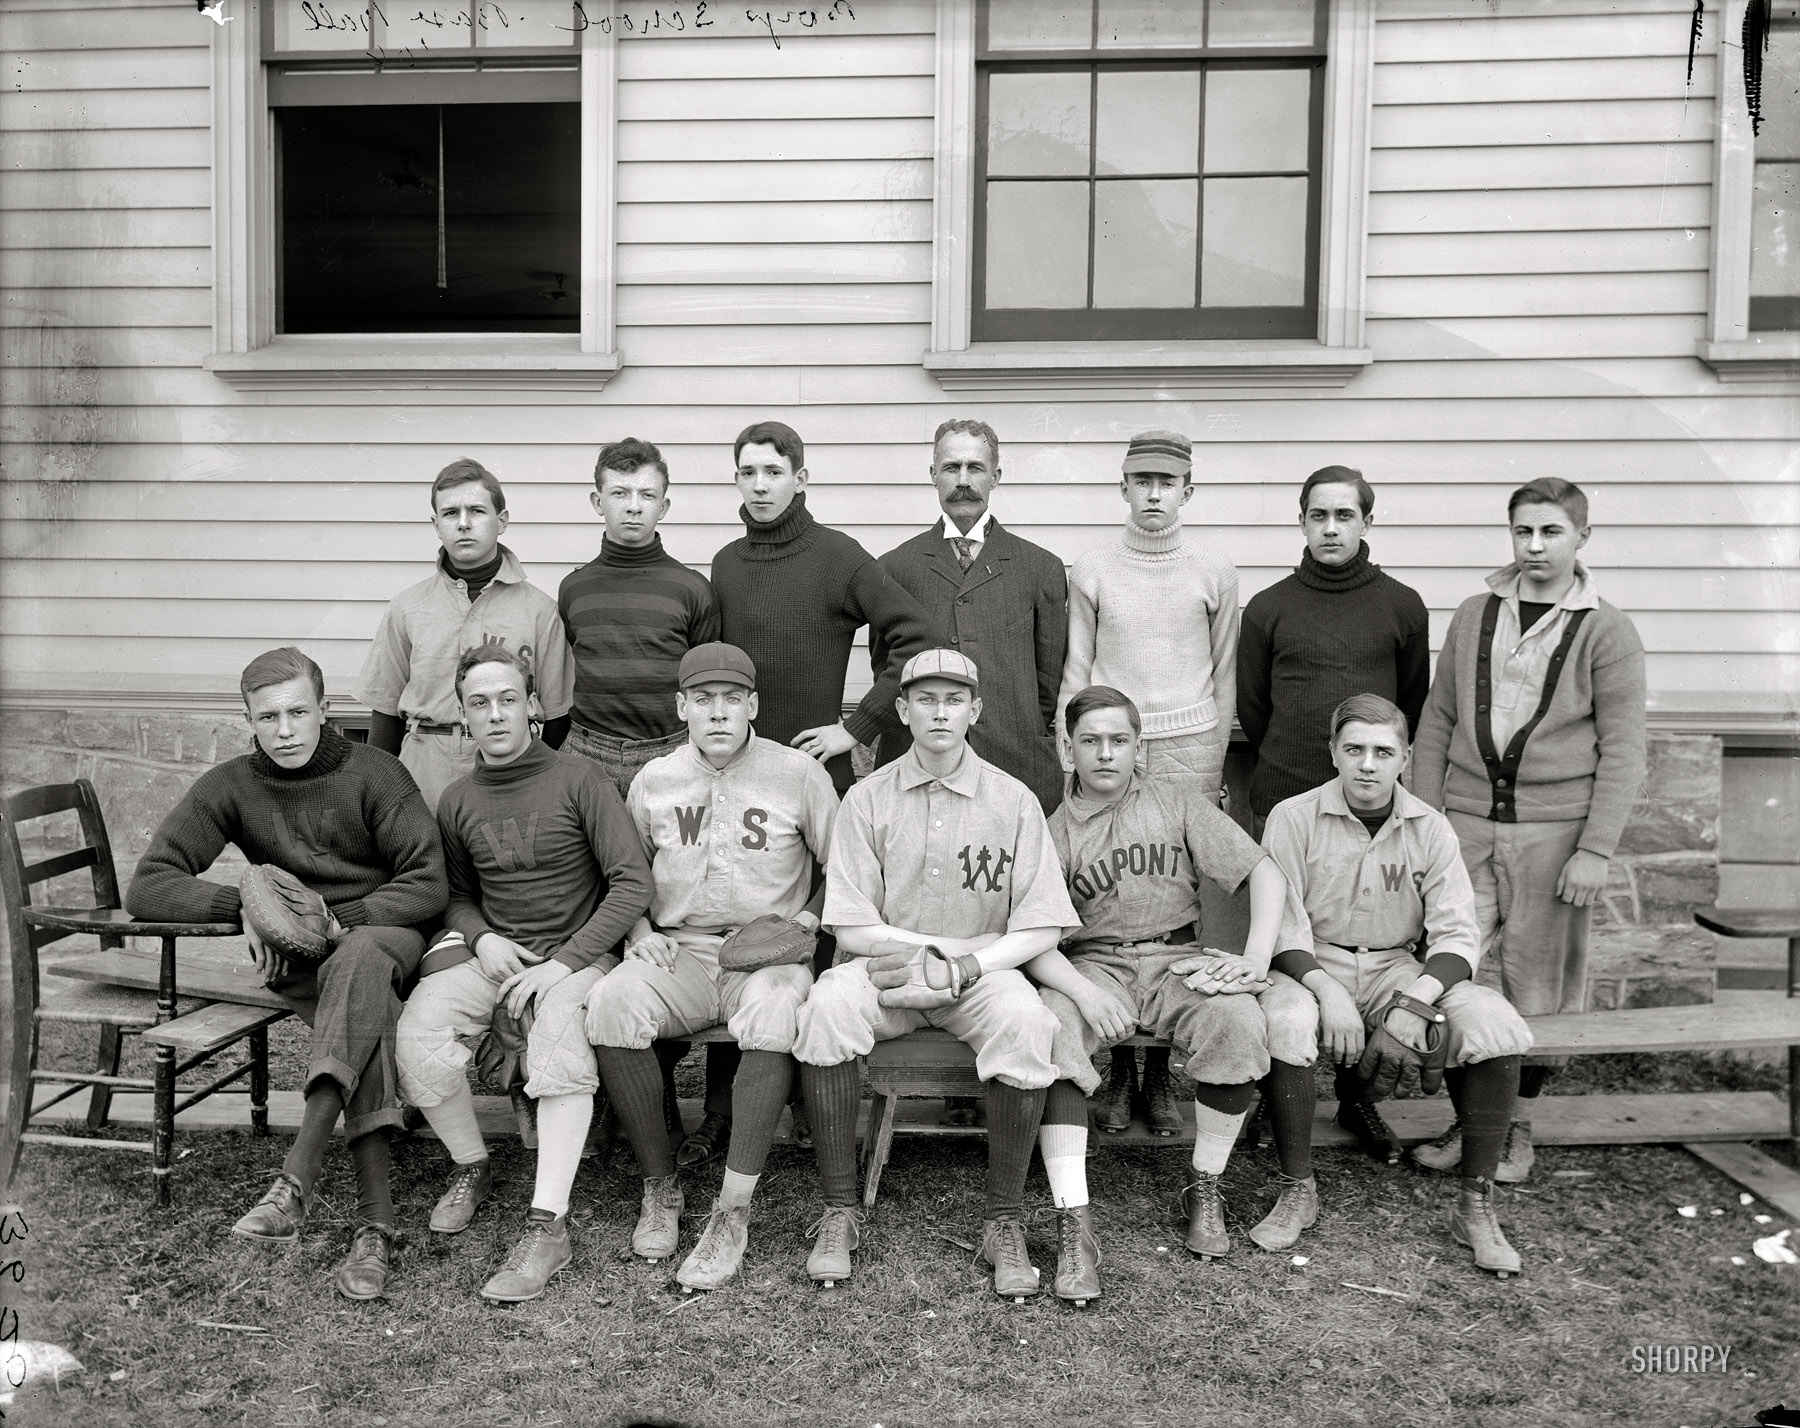 Washington, D.C., or vicinity, 1906. "Boys school baseball '06." Harris & Ewing Collection glass negative, Library of Congress. View full size.